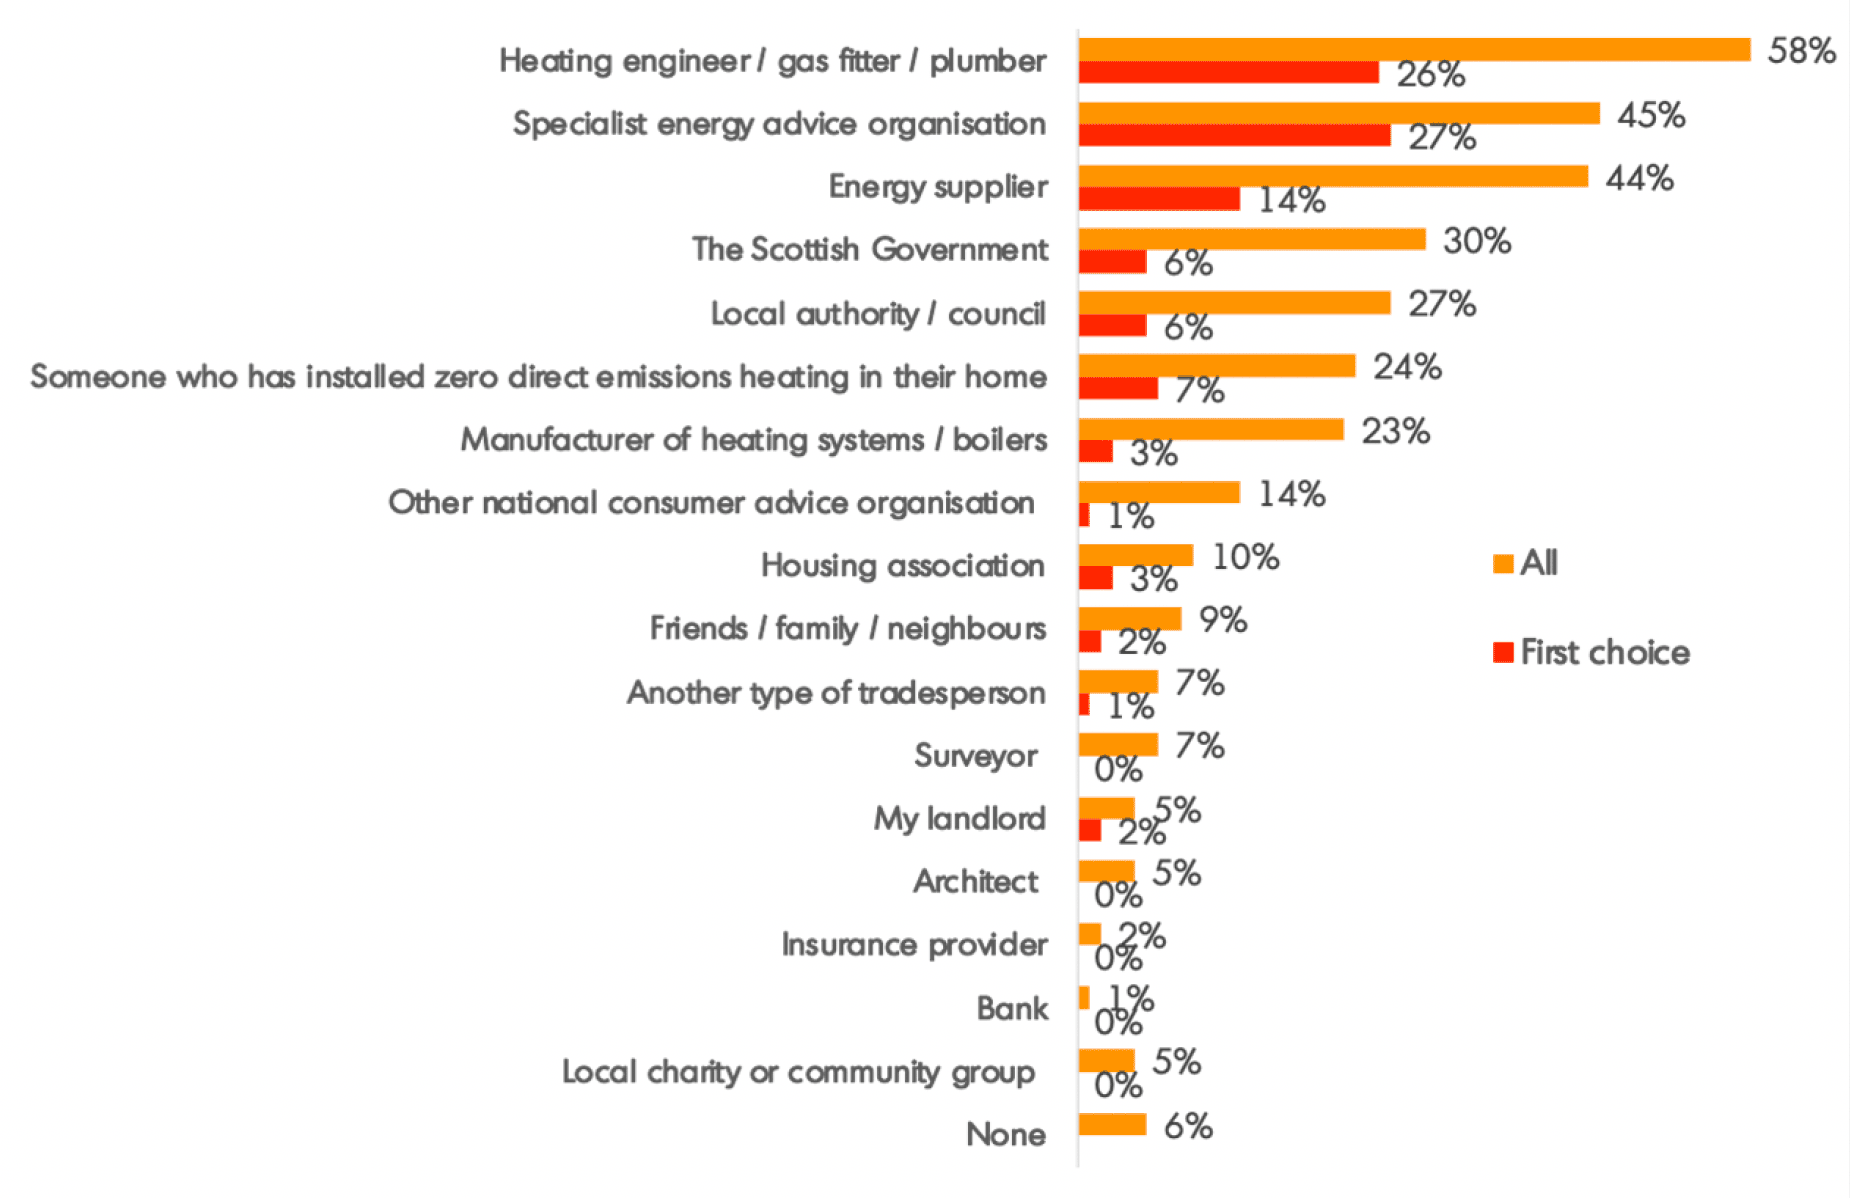 Bar chart showing the percentage of respondents who selected different sources of advice on clean heating systems as their: first choice; and altogether. The most selected source are heating engineers/ gas fitters/ plumbers. 